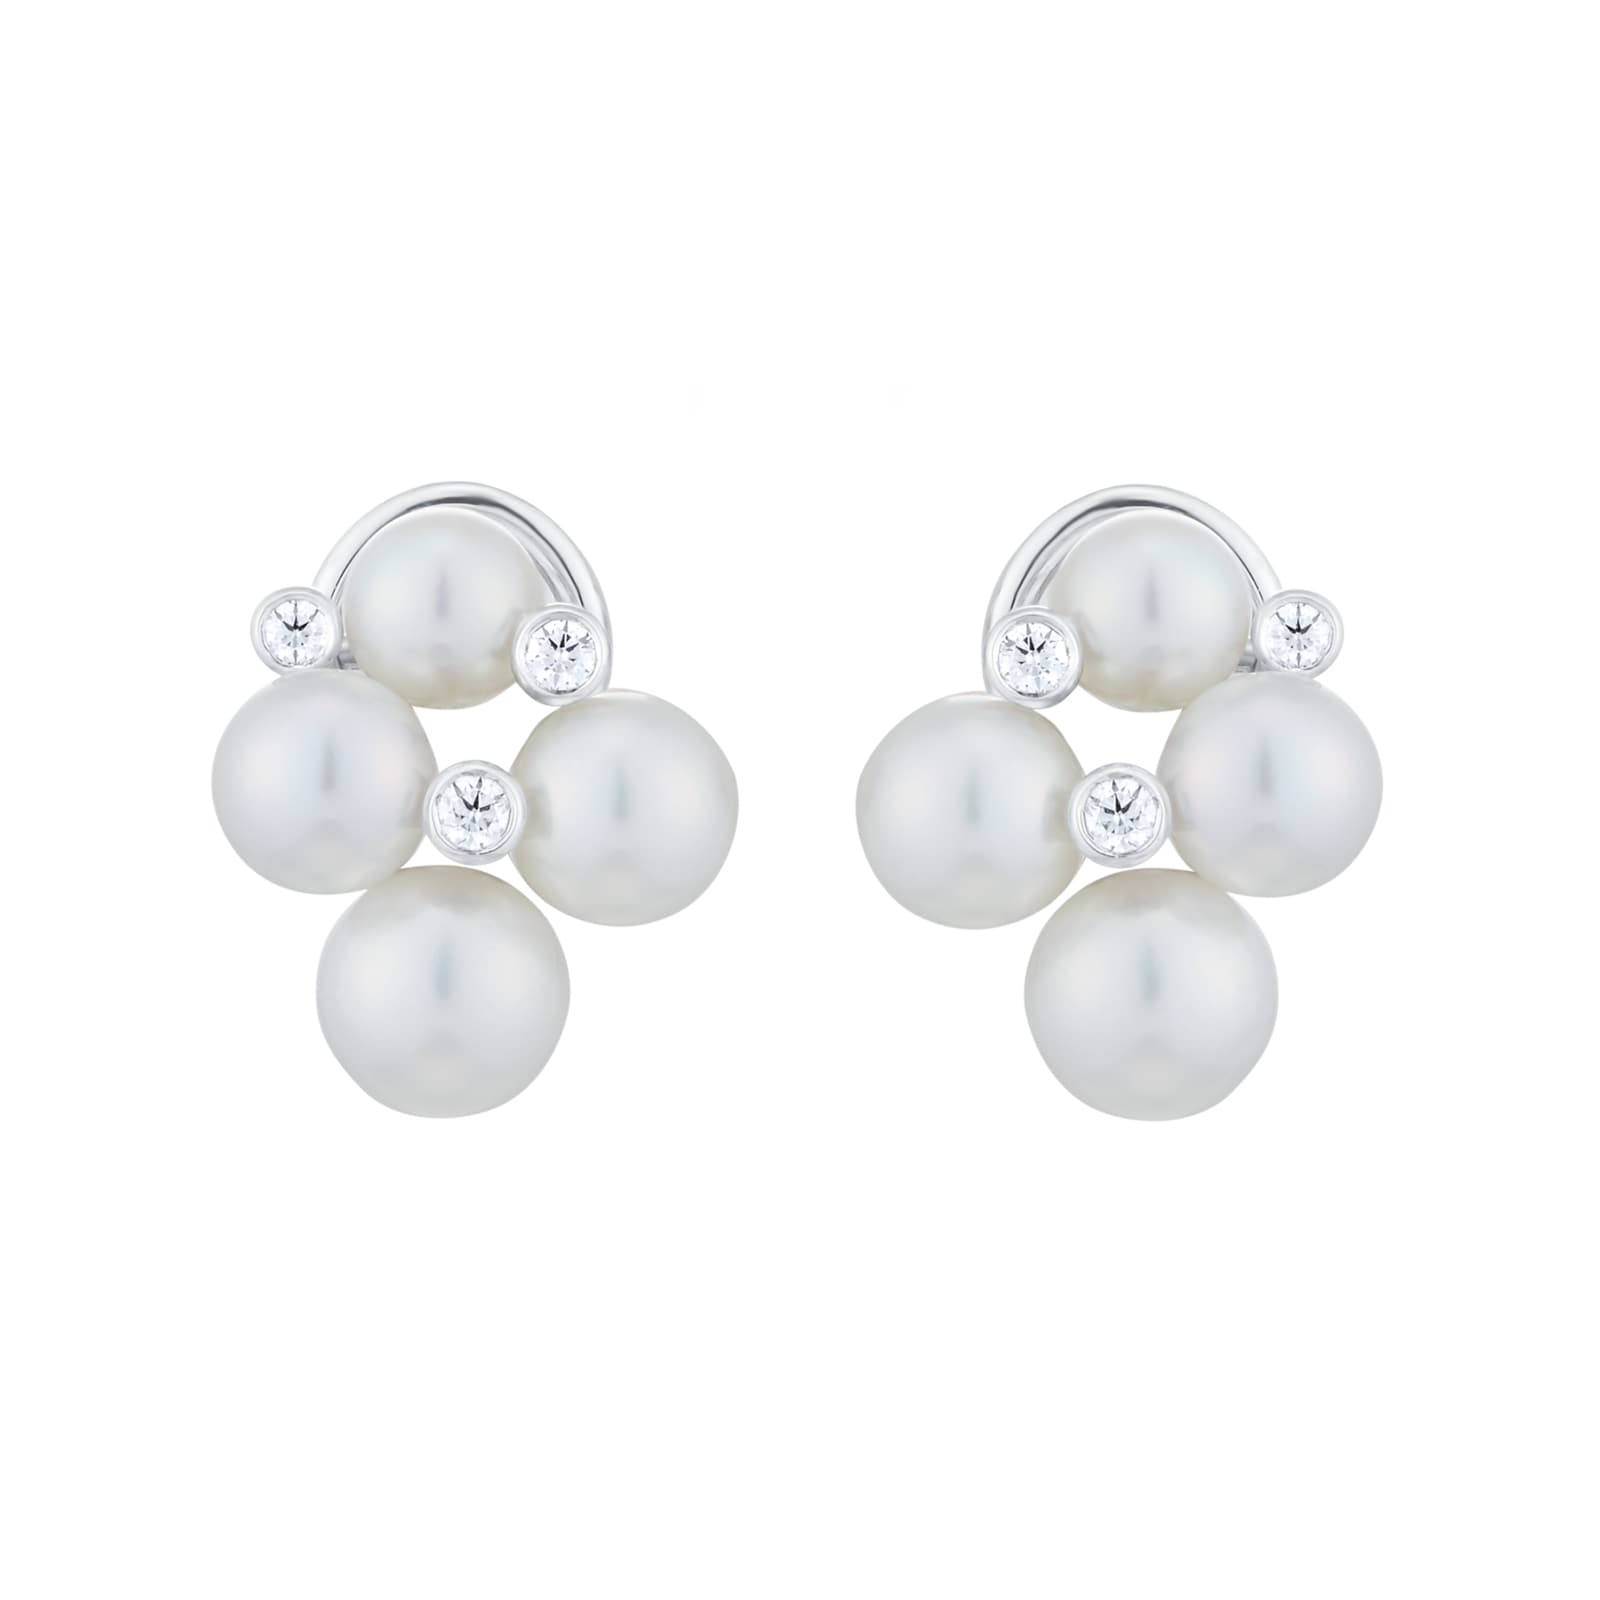 Bubble Collection earrings